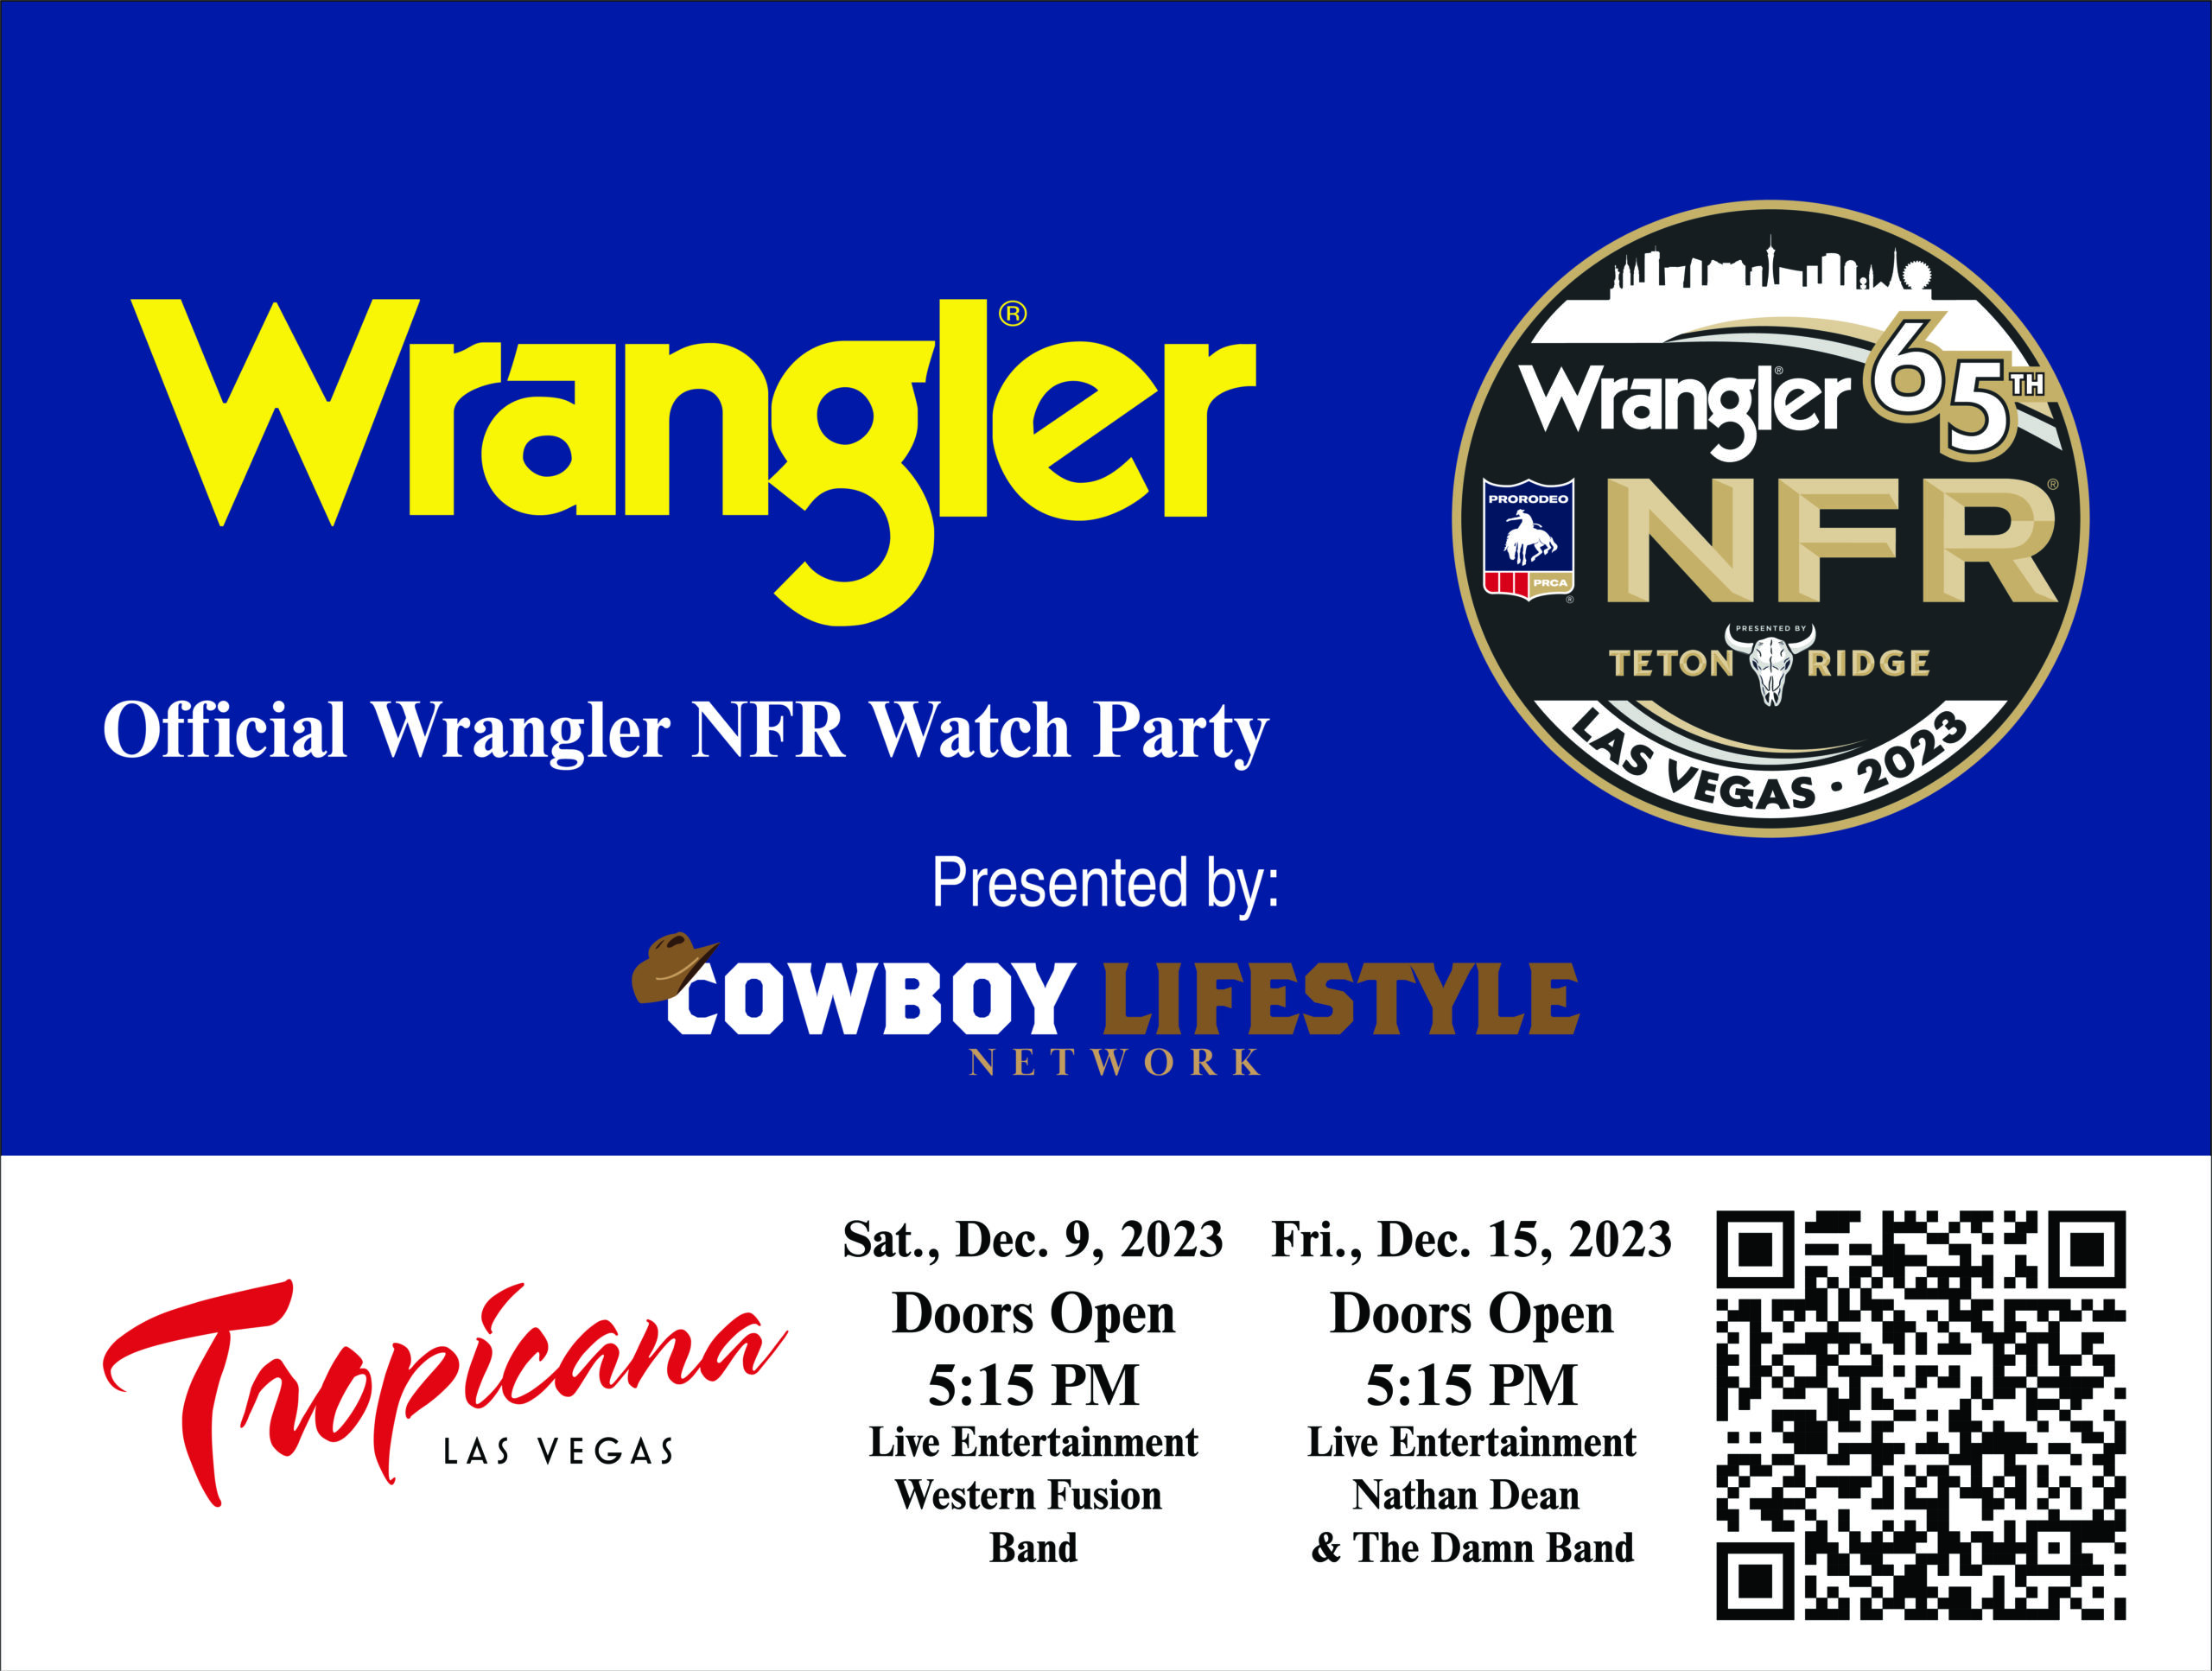 MustSee Concerts During the 2023 NFR Cowboy Lifestyle Network